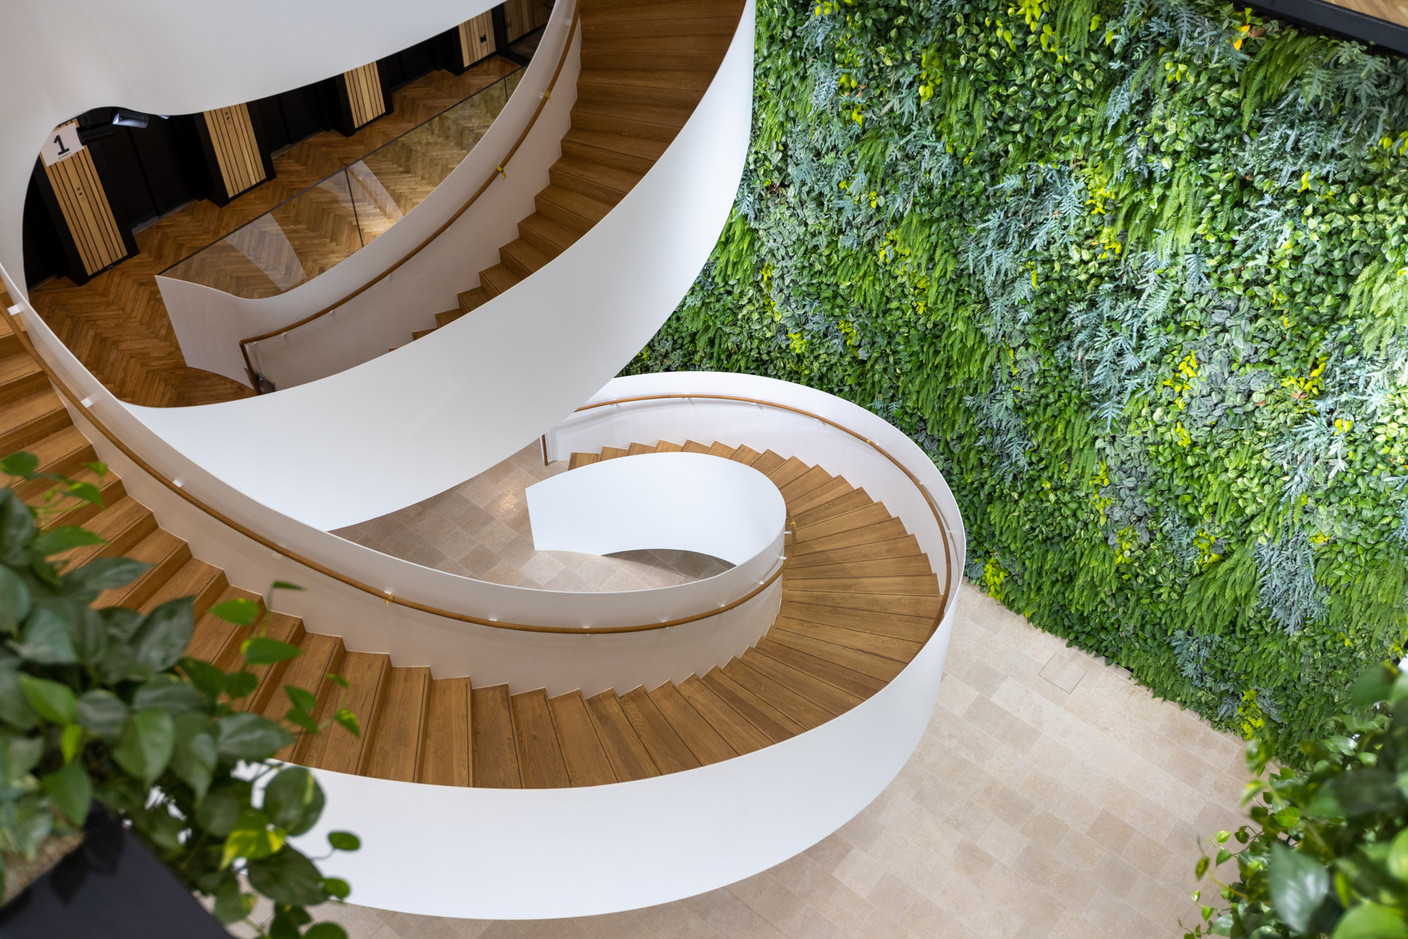 A plant wall of over 80m2 was installed in the atrium, Photo: Romain Gamba/Maison Moderne